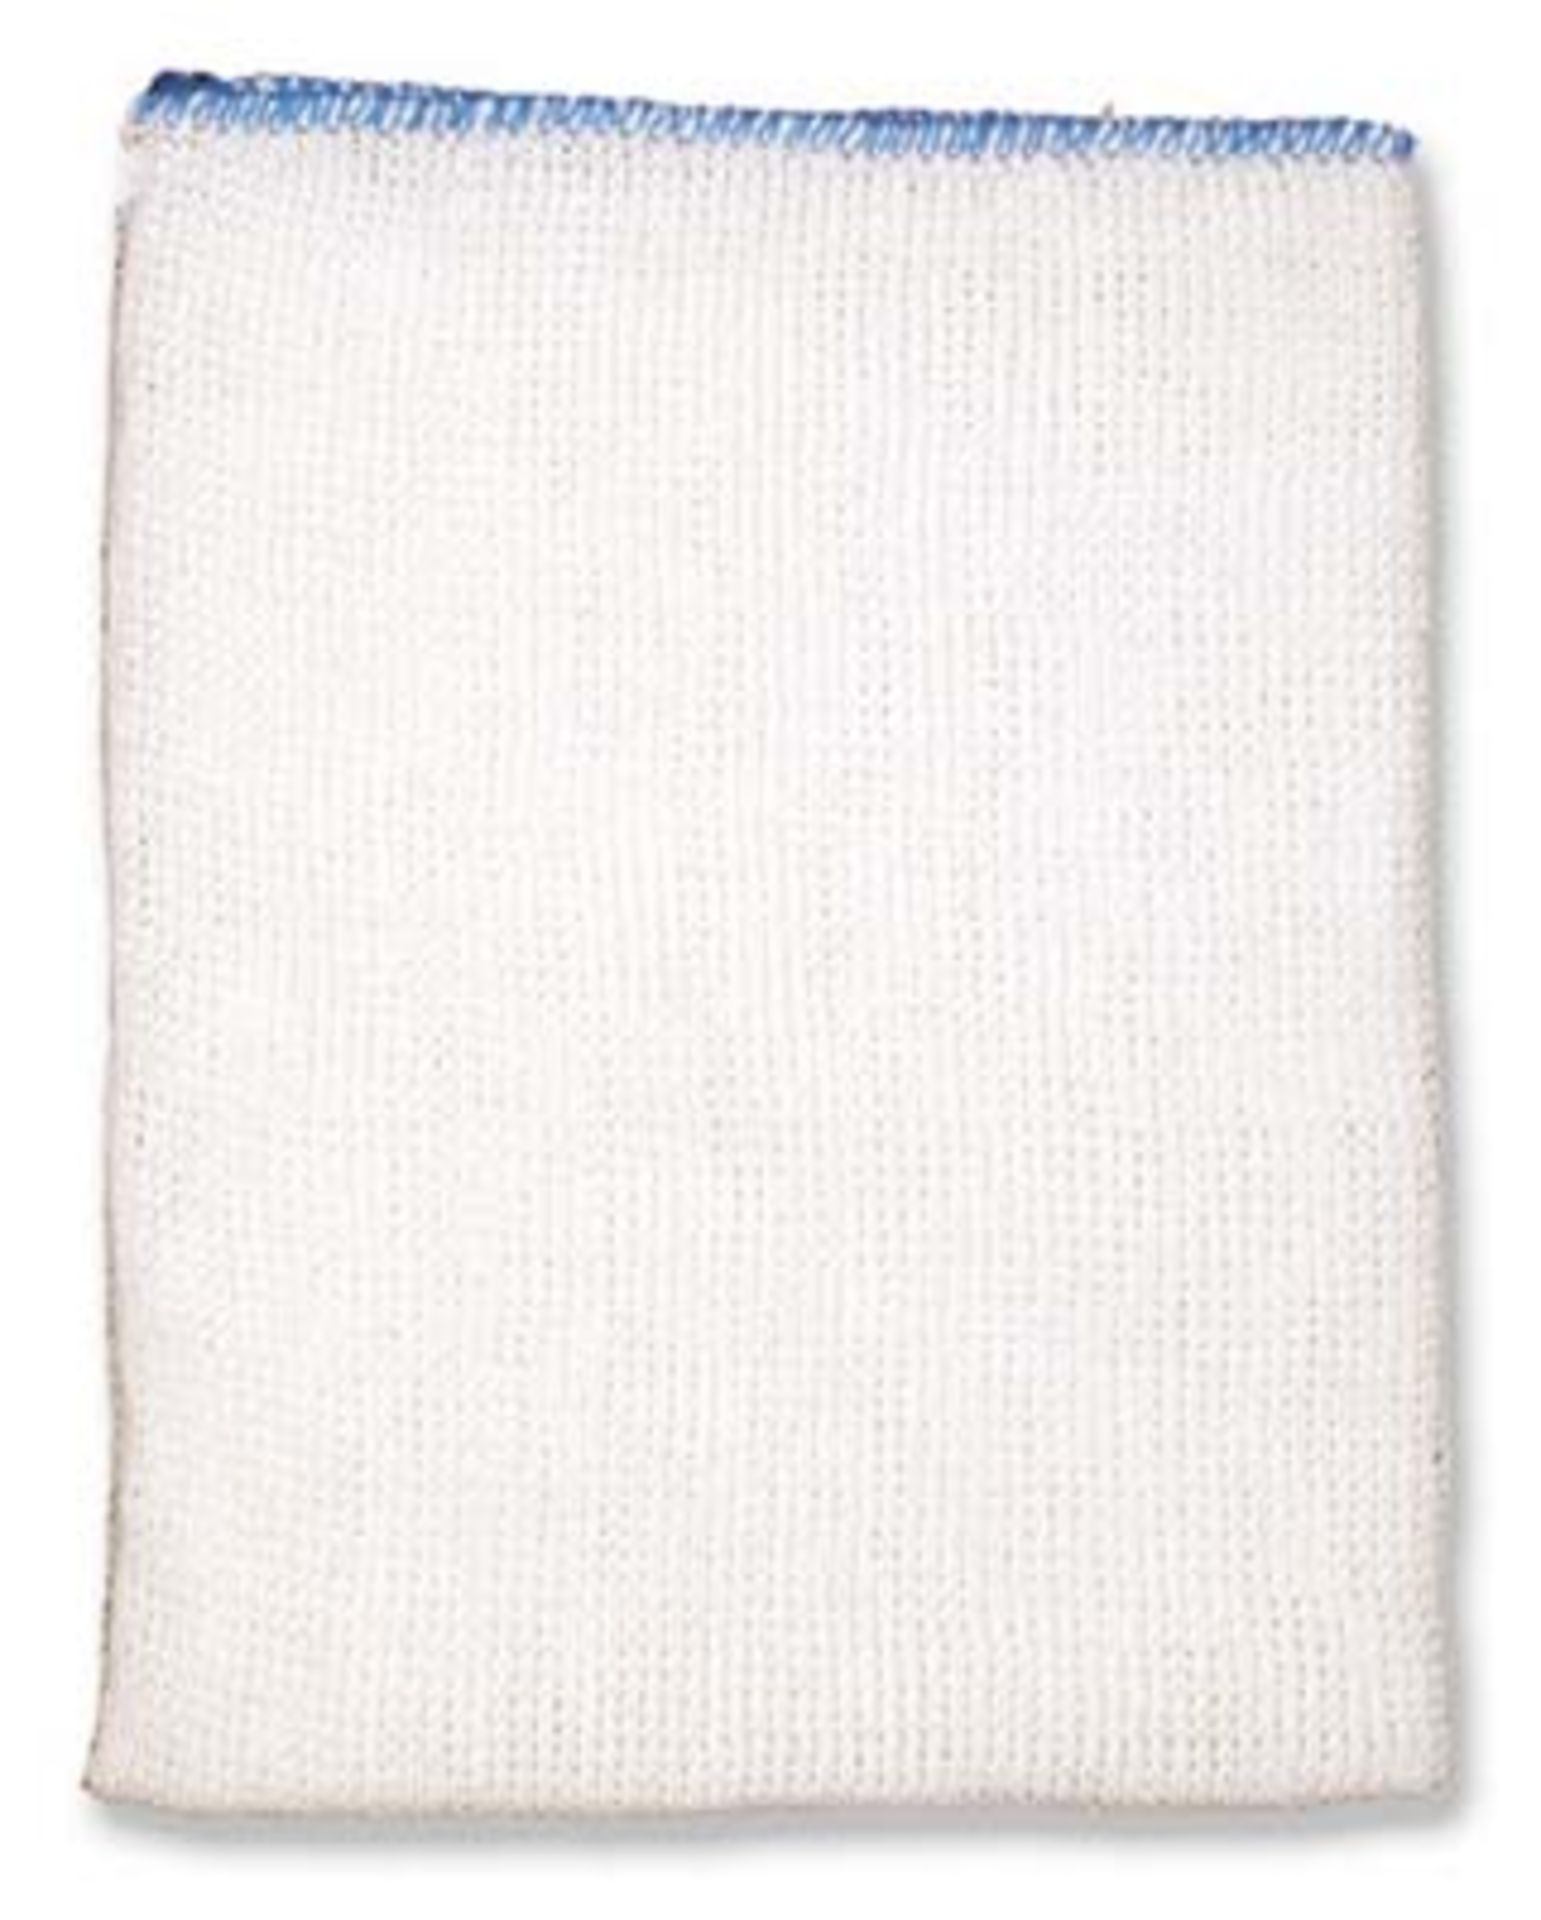 V *TRADE QTY* Brand New Eighty White Cotton Dish Cloths X 5 YOUR BID PRICE TO BE MULTIPLIED BY FIVE